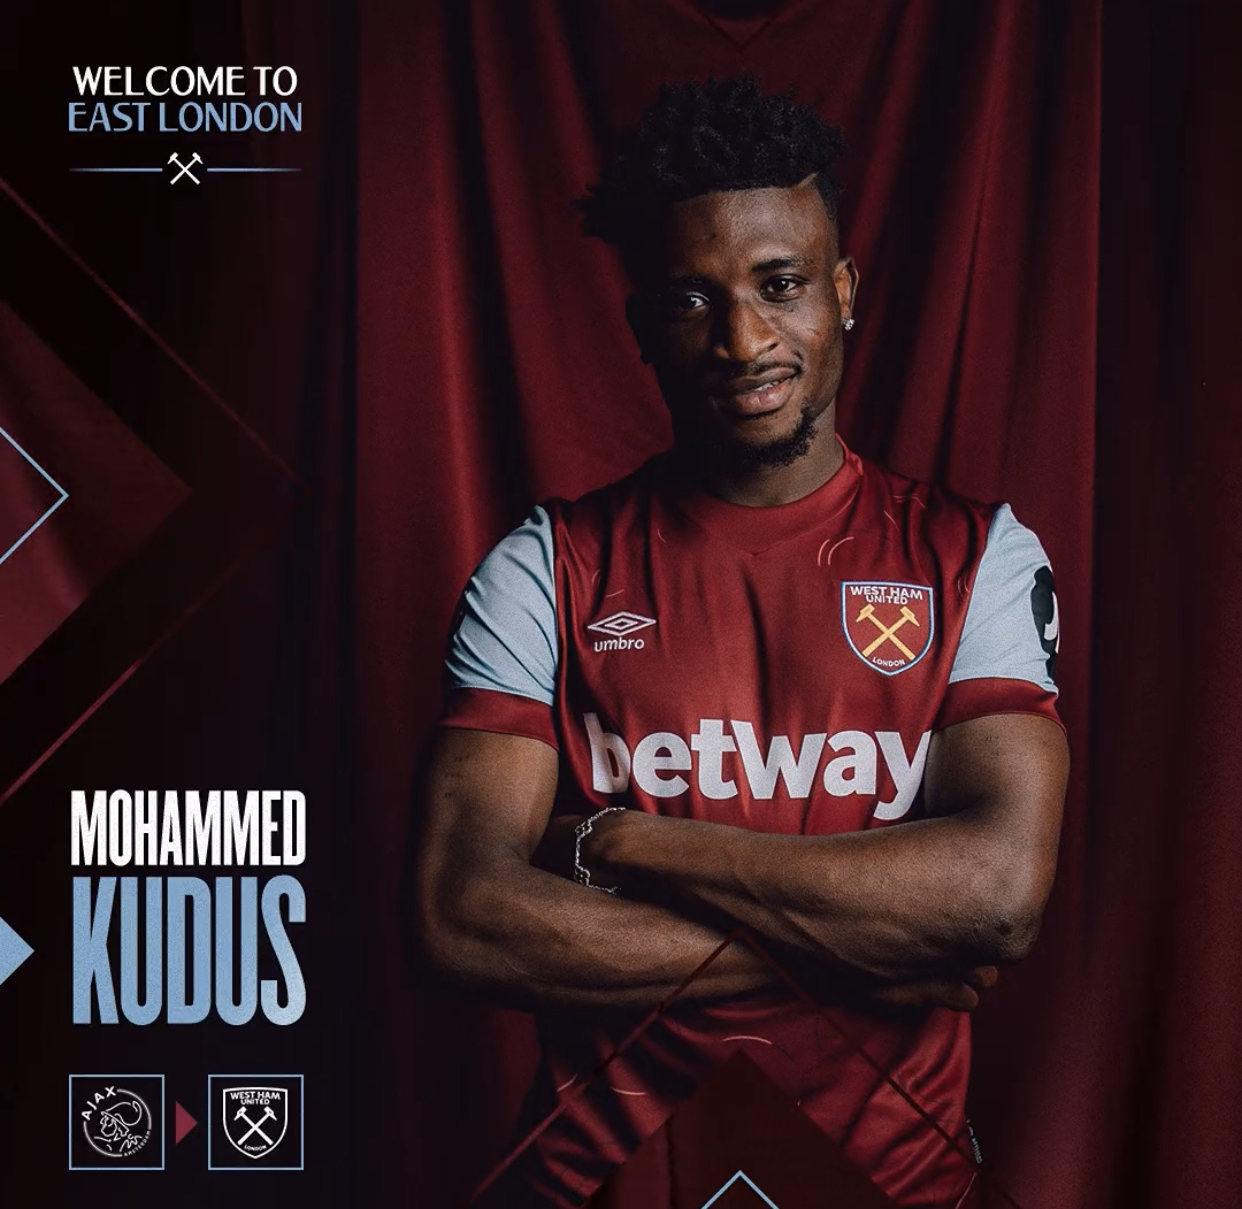 “We outside, abonten” - Watch West Ham United’s Ghana-inspired Mohammed Kudus unveiling video